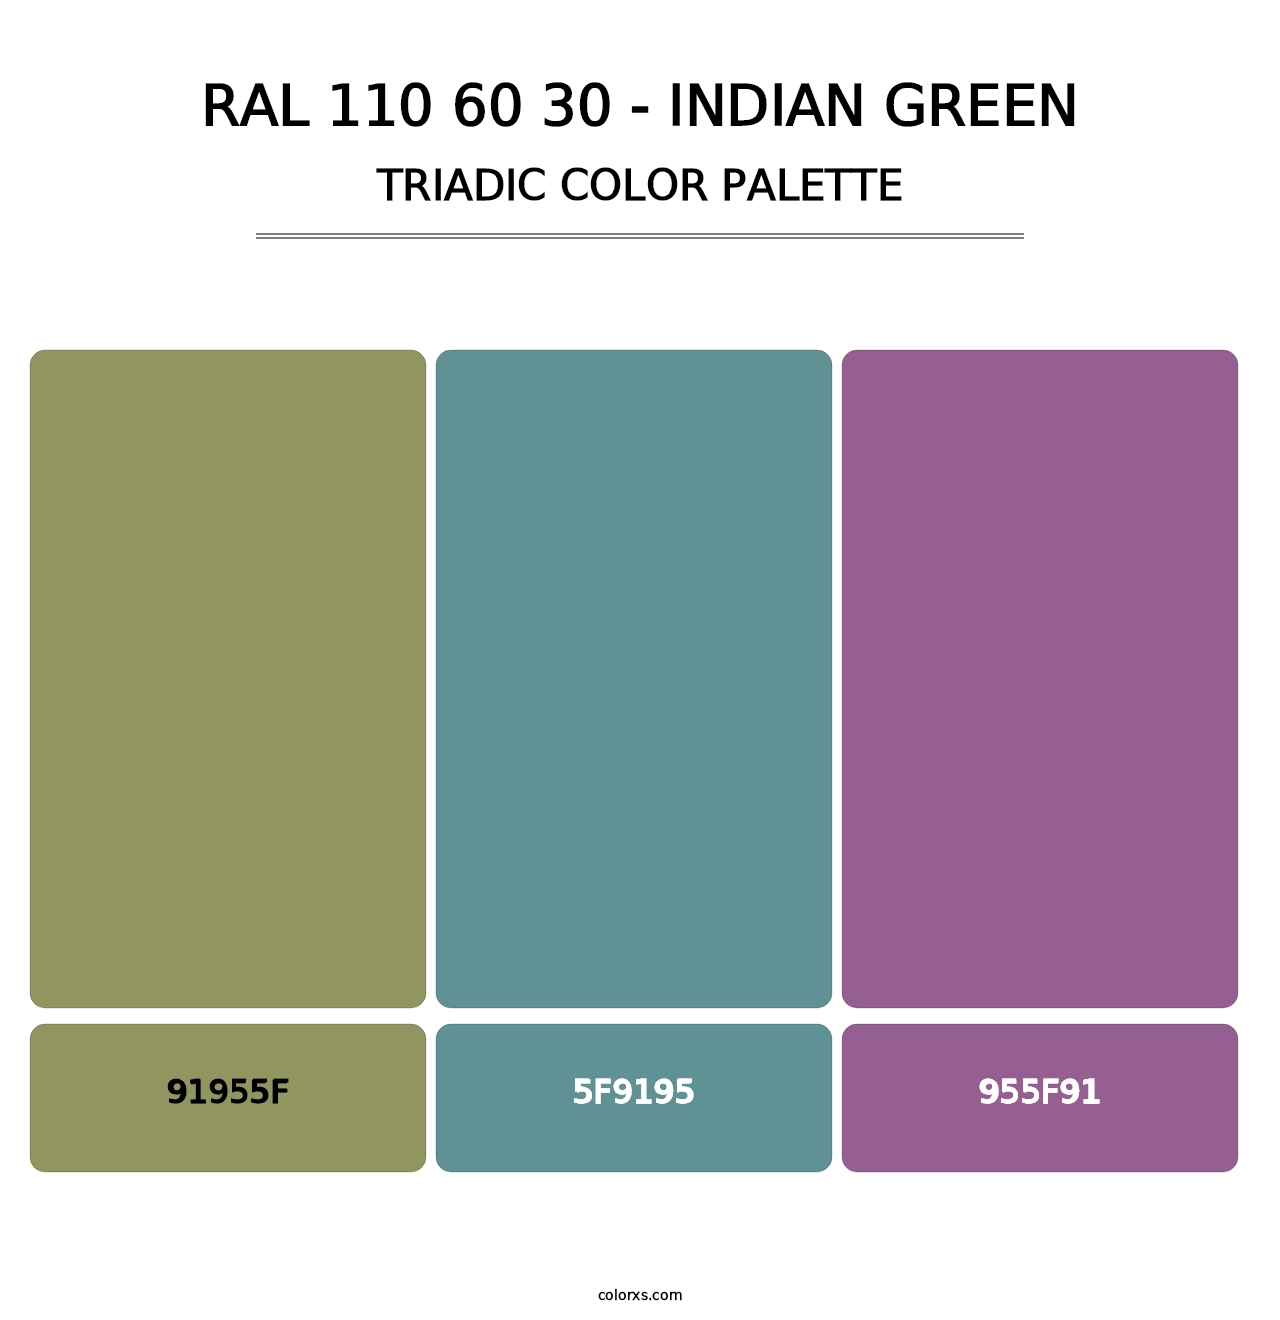 RAL 110 60 30 - Indian Green - Triadic Color Palette